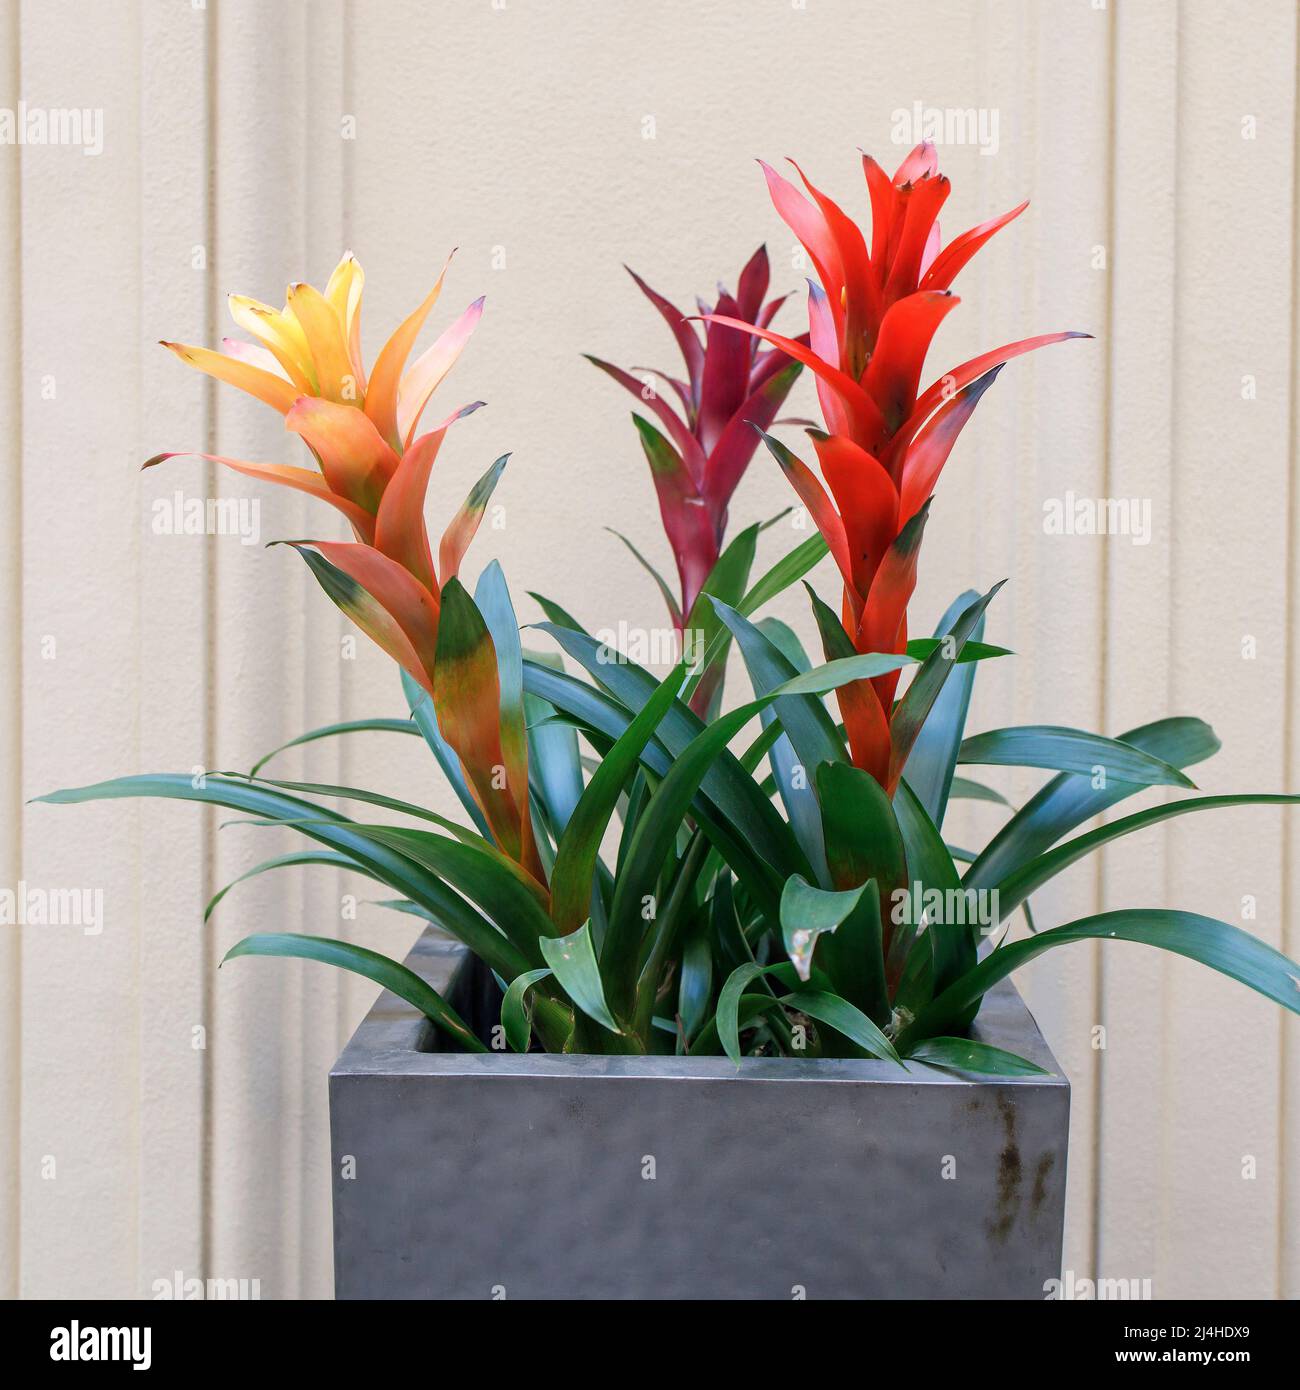 Yellow and red Guzmania in a large flower pot as an interior decoration Stock Photo